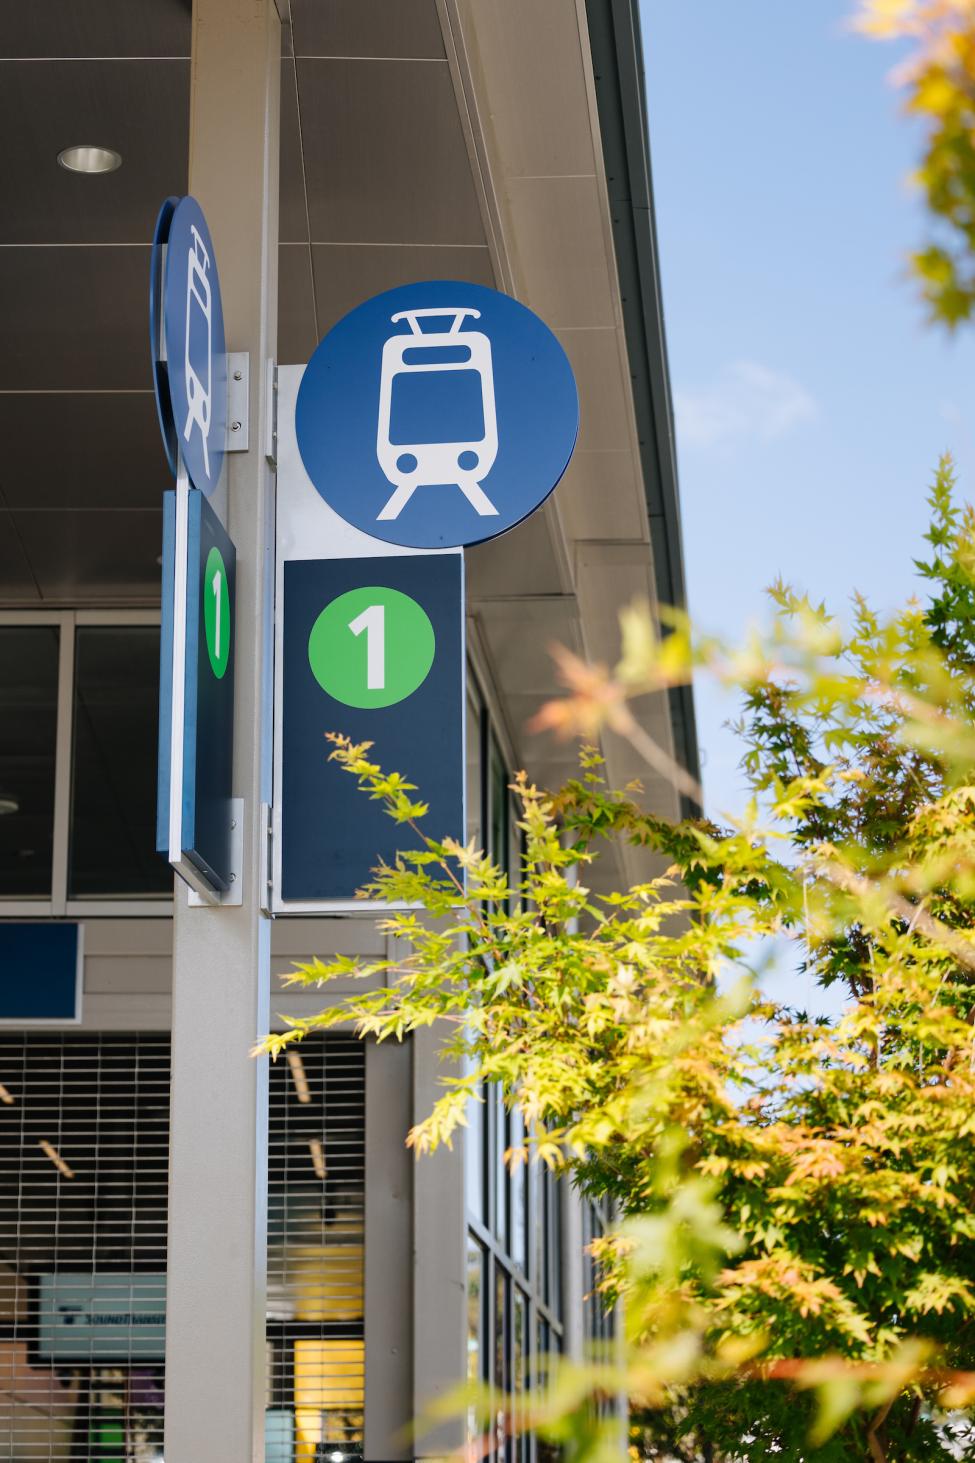 A sign shows the Link light rail icon and a green number "1."